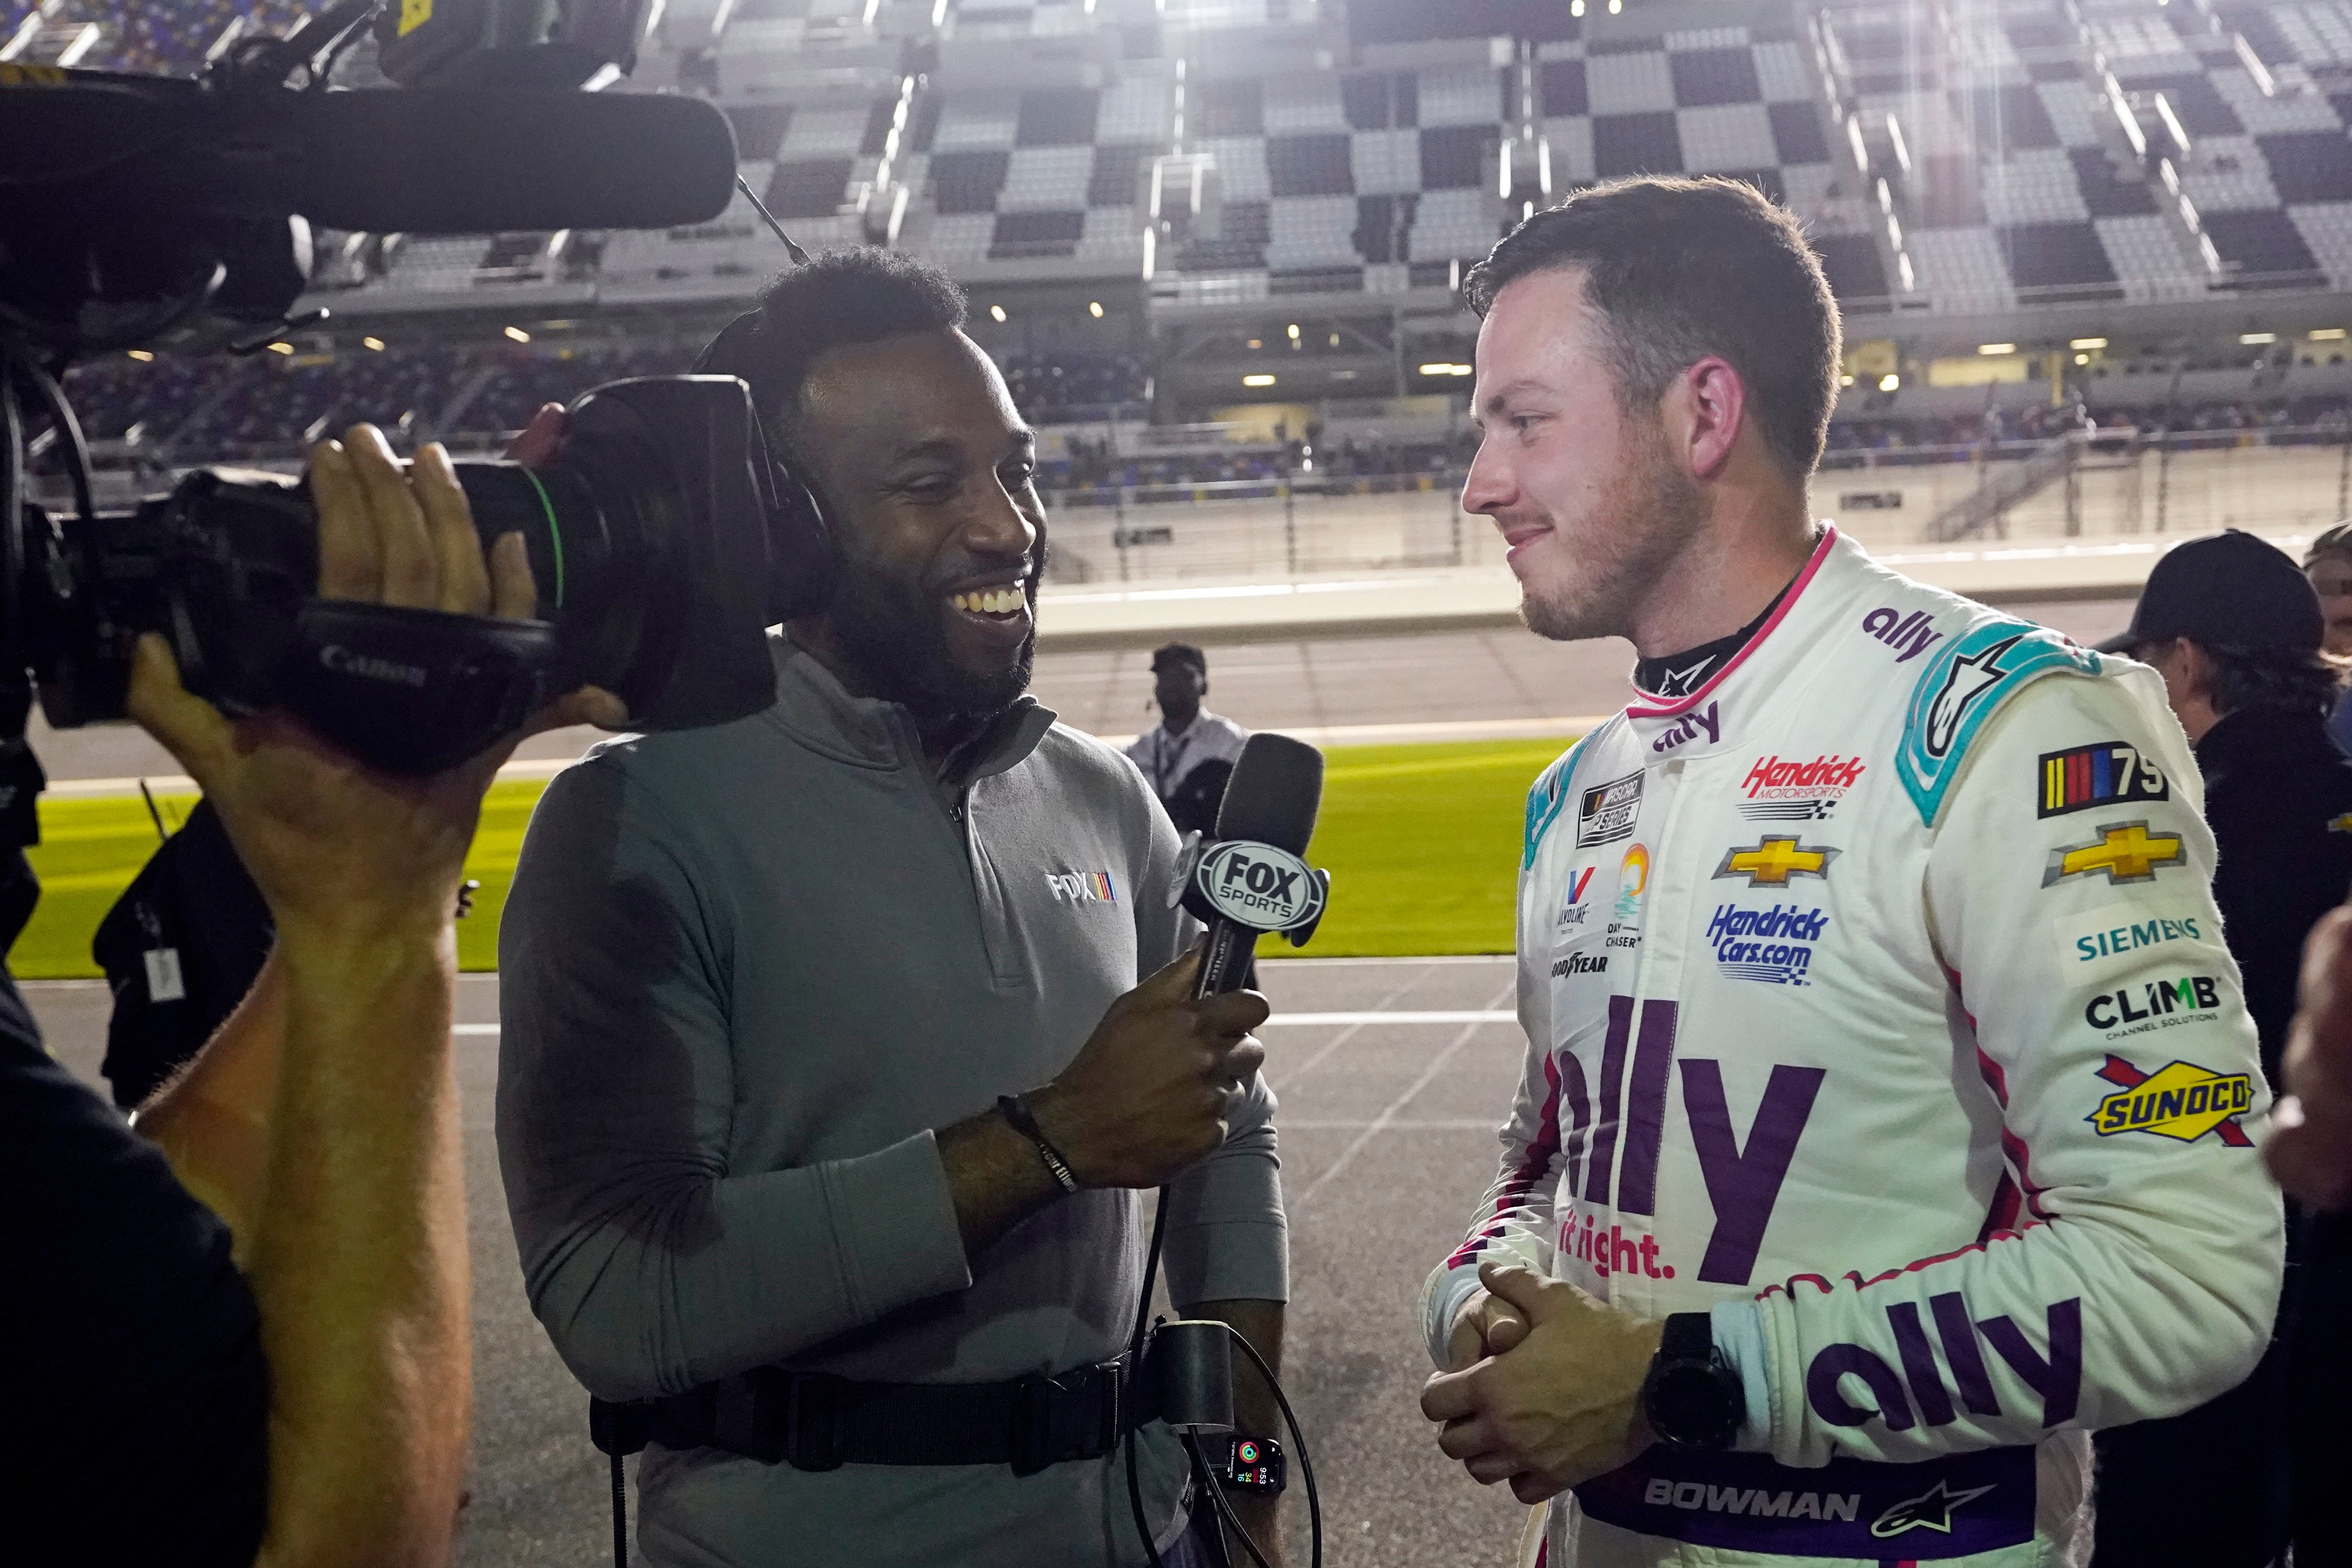 Fox pit reporter Sims a symbol of NASCARs diversity goals The Independent